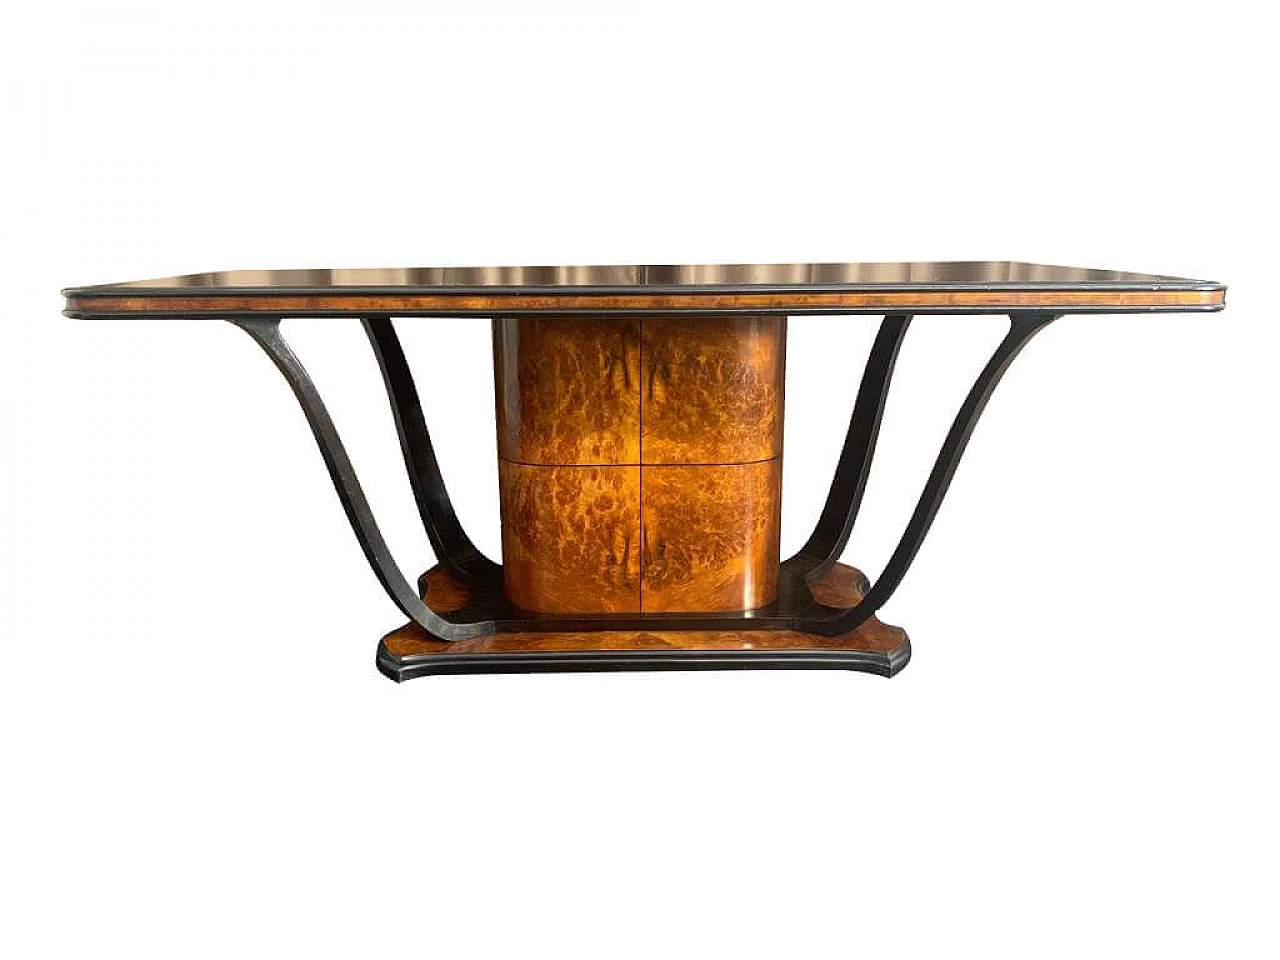 Art Deco dining table in briarwood and ebony, 1930s 1212415